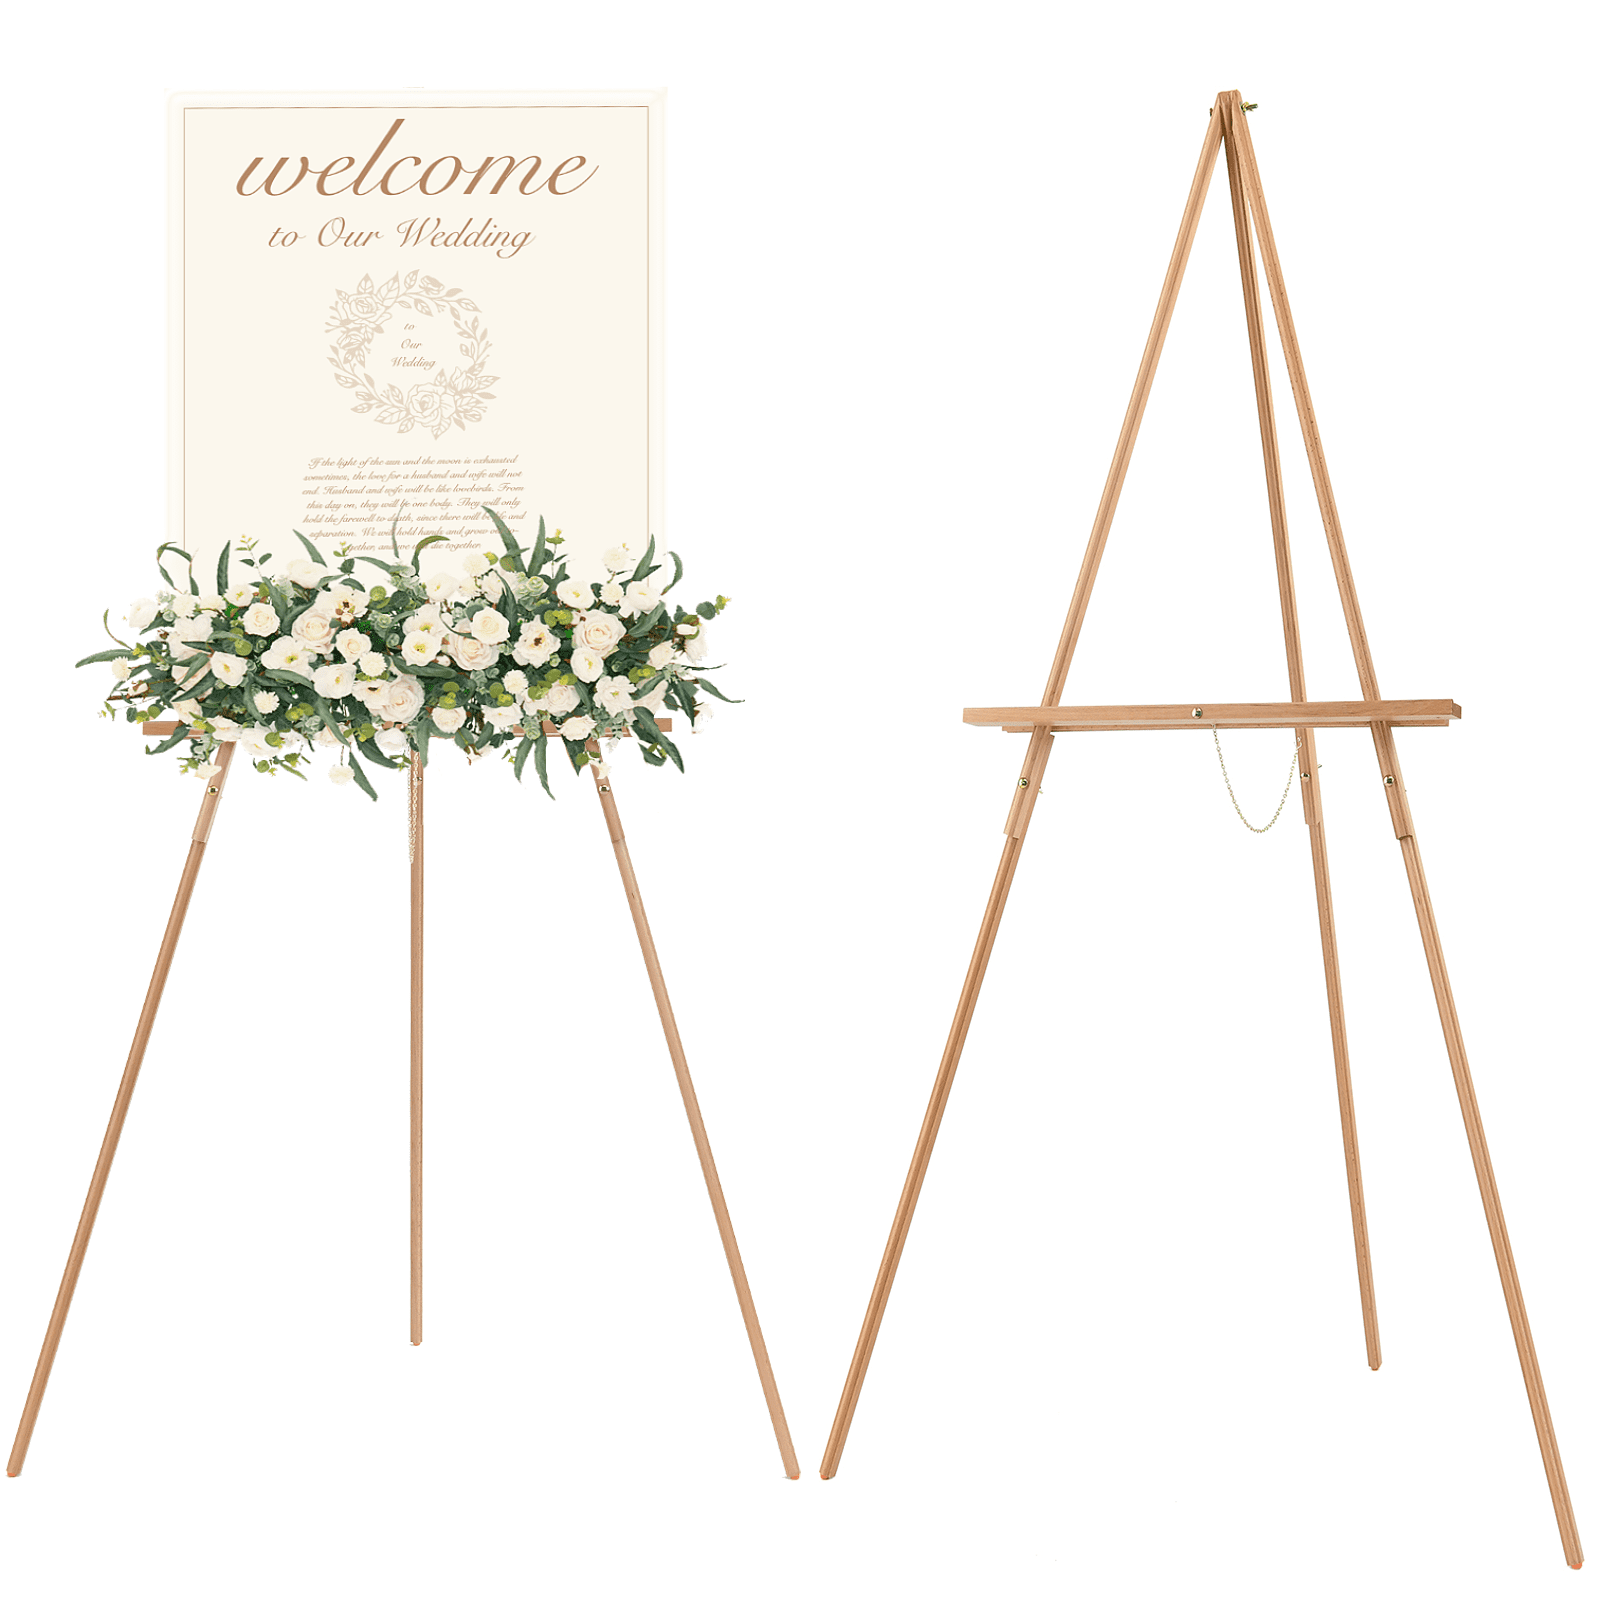 MEEDEN Easel Stand for Display, 64 Wooden Tripod Artist Floor Easel for  Wedding Sign, Display Easel Stand for Posters, Signs, Pictures, Board